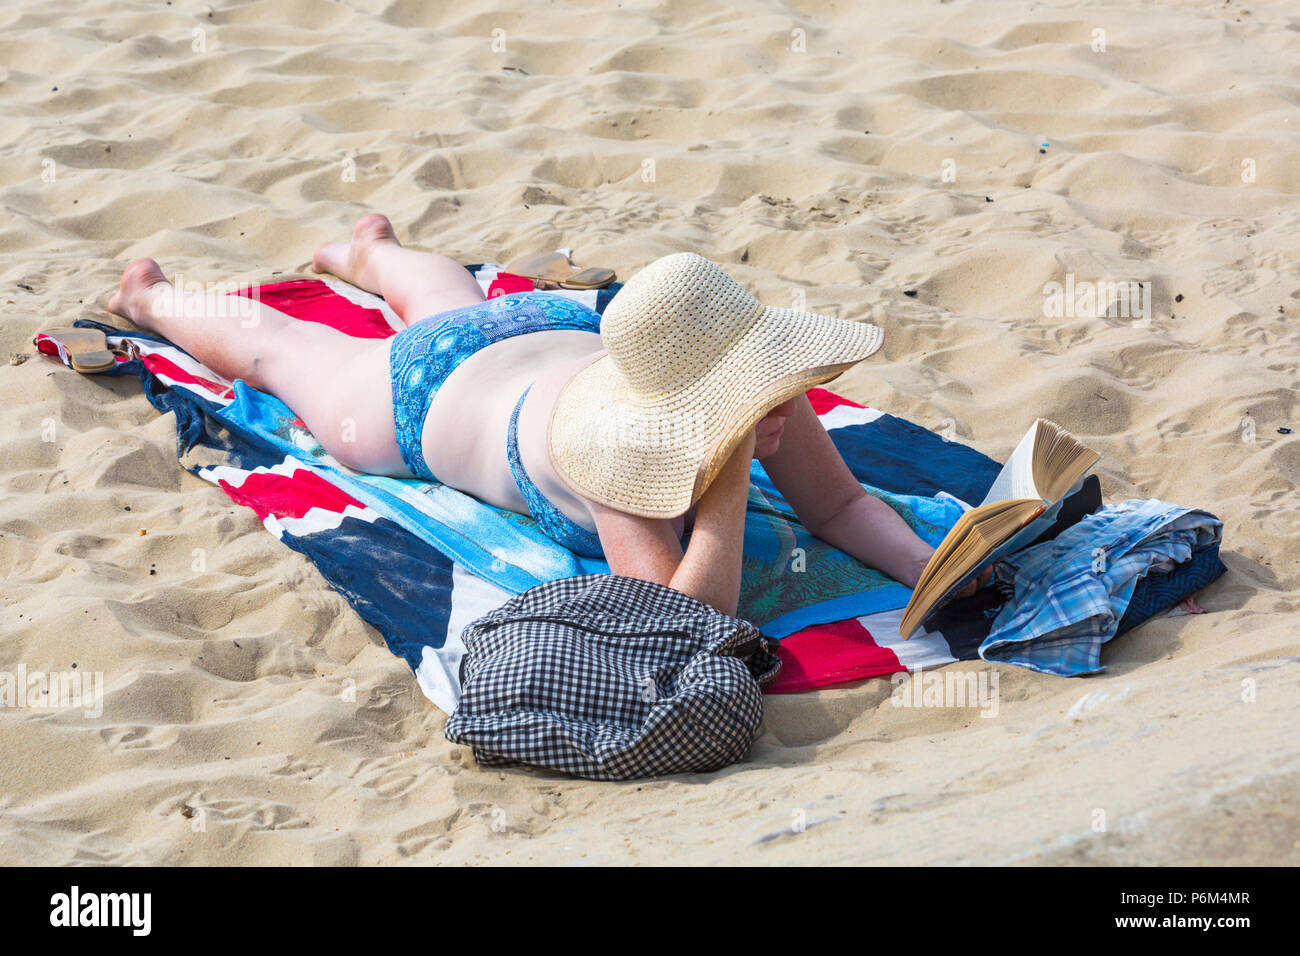 Bournemouth, Dorset, UK. 1st July 2018. UK weather: hazy sunshine, but still warm as thousands of sunseekers head to the beaches at Bournemouth to enjoy a day at the seaside. woman sunbathing on beach reading book wearing floppy hat. Credit: Carolyn Jenkins/Alamy Live News Stock Photo